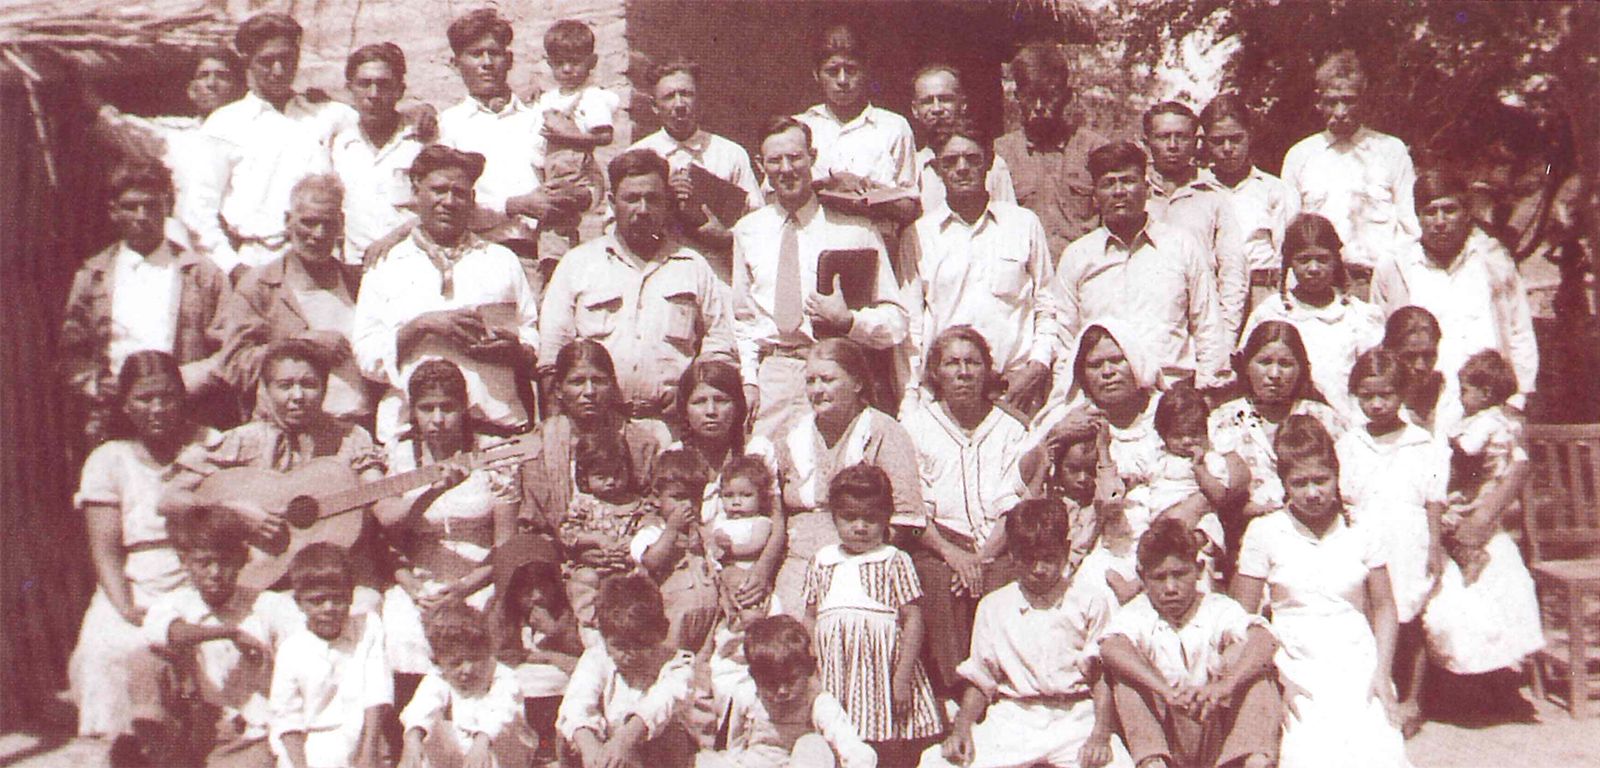 Vessie D. Hargrave (center) with a congregation in Navolato, Sonora, Mexico, in the 1940s